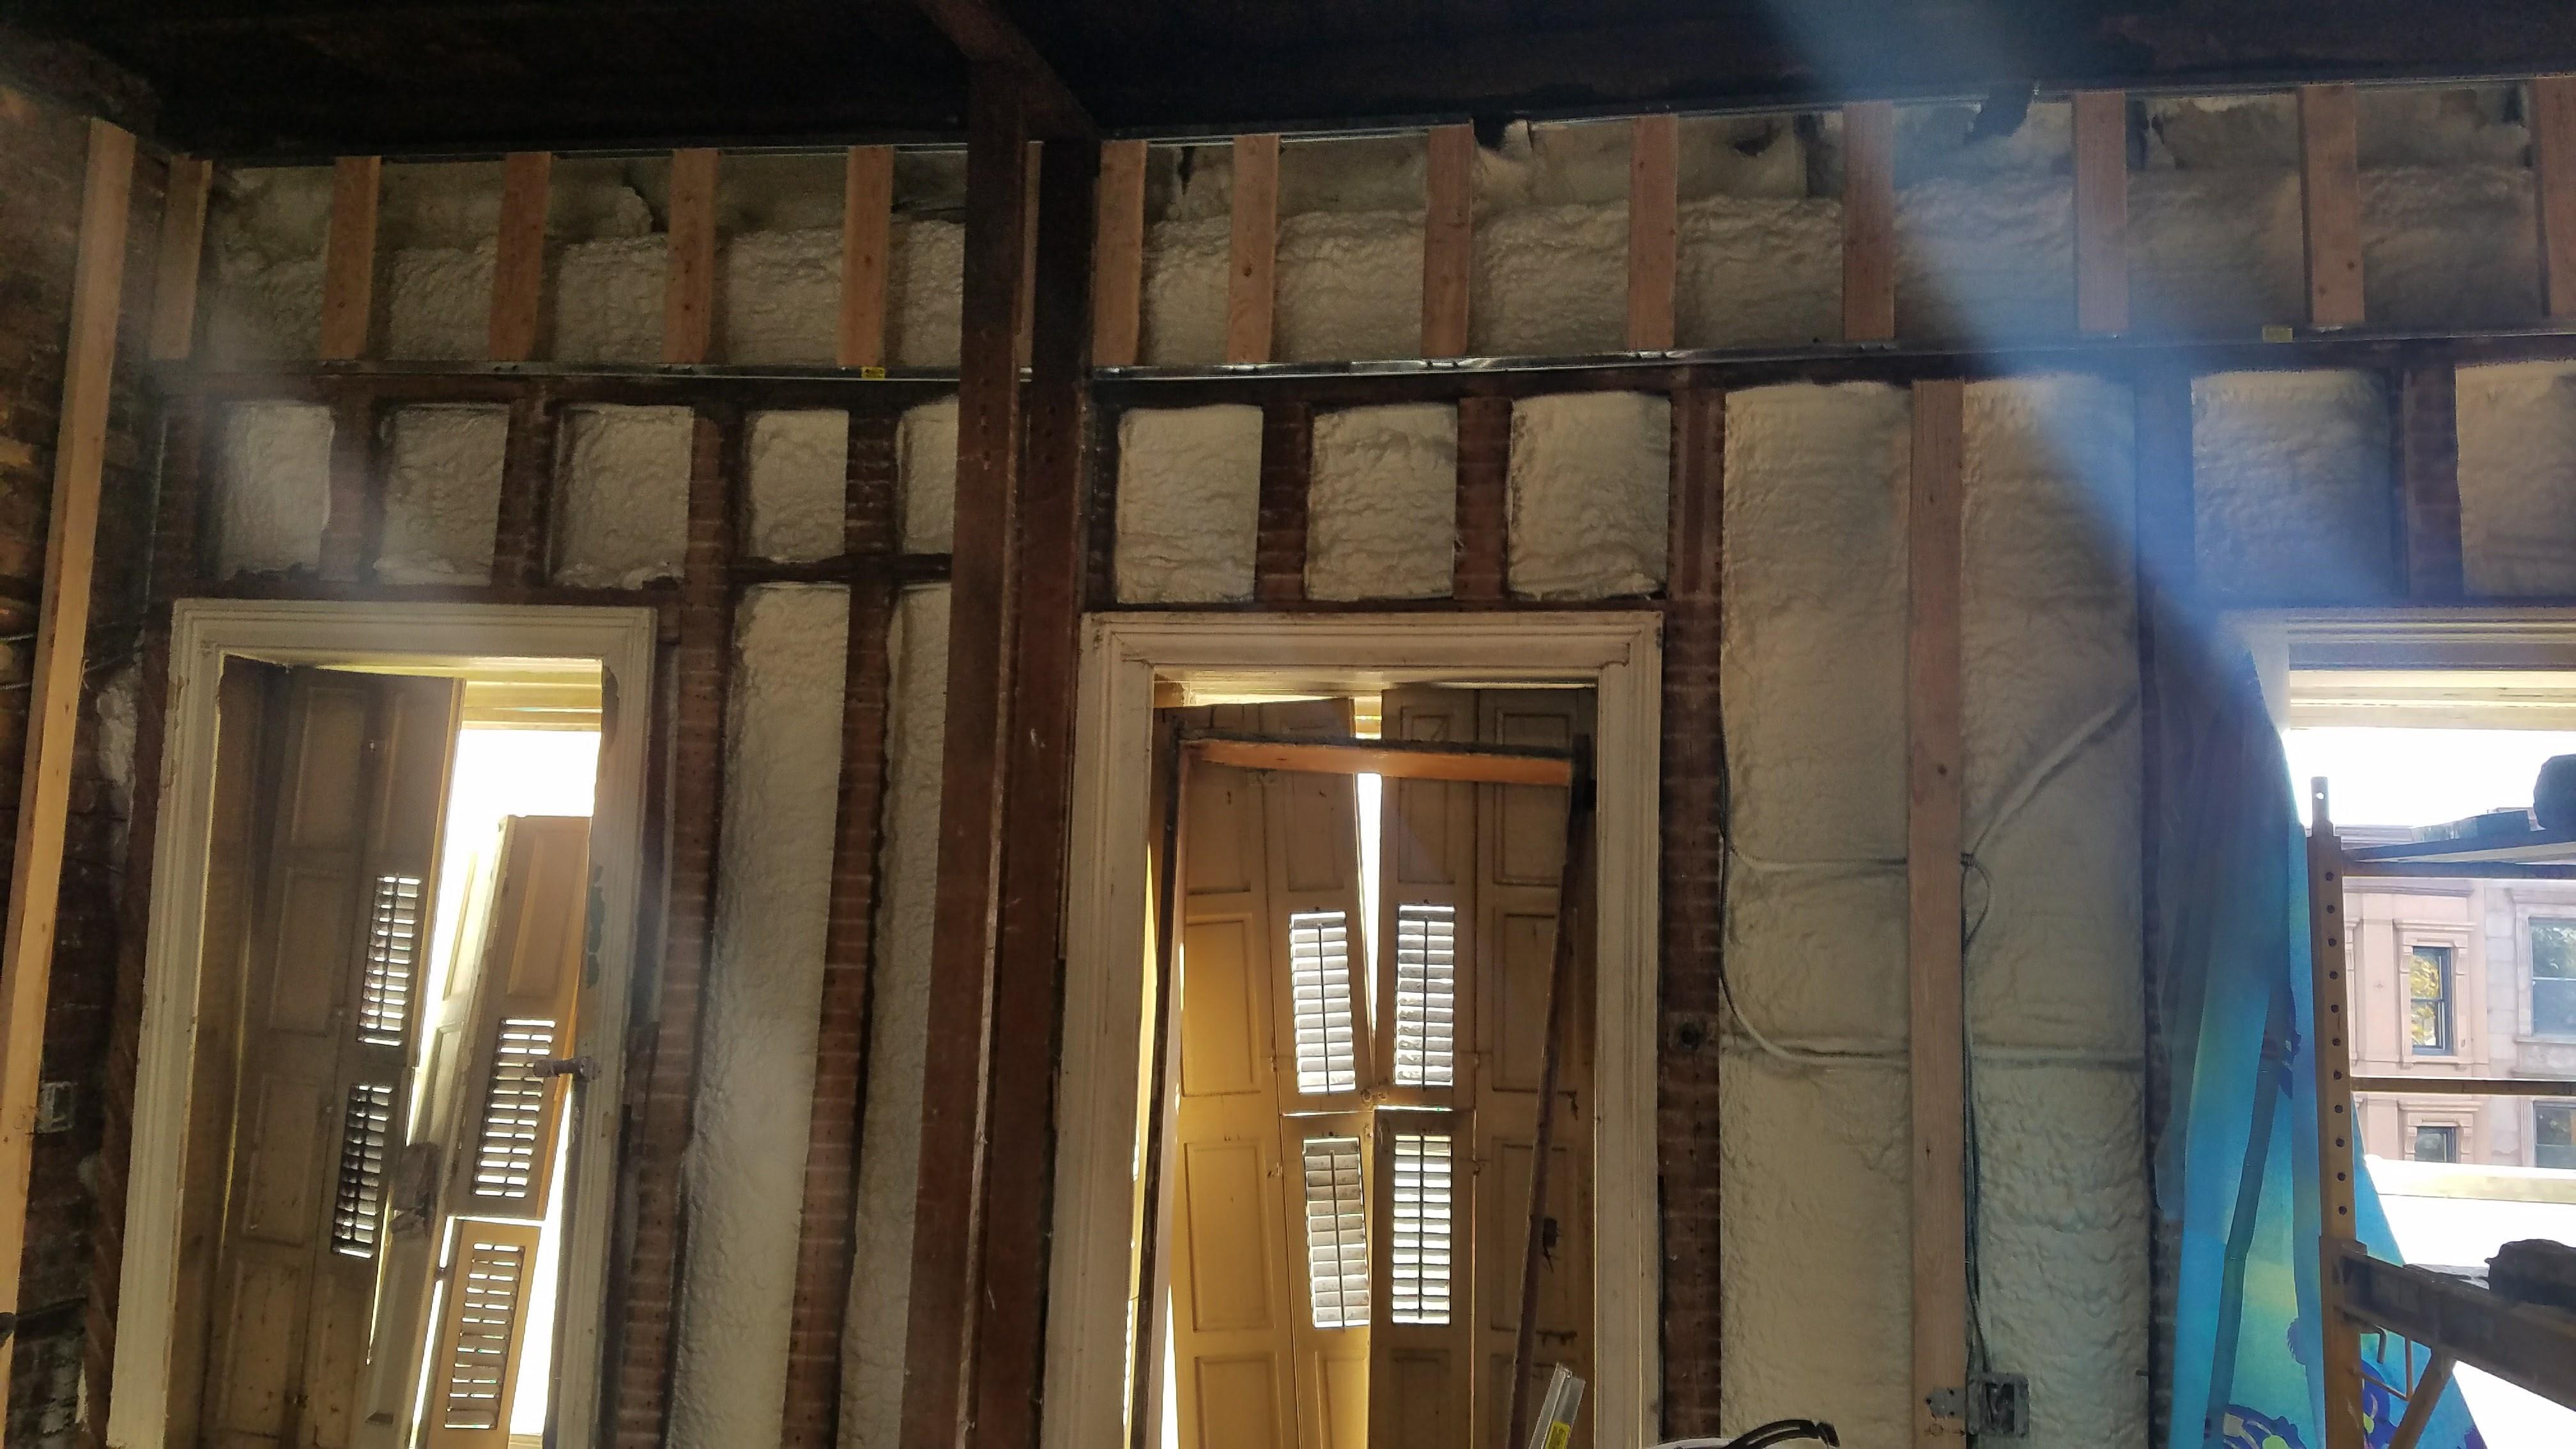 Insulation For Walls, Ceiling, Basement - Brooklyn, NY 11216